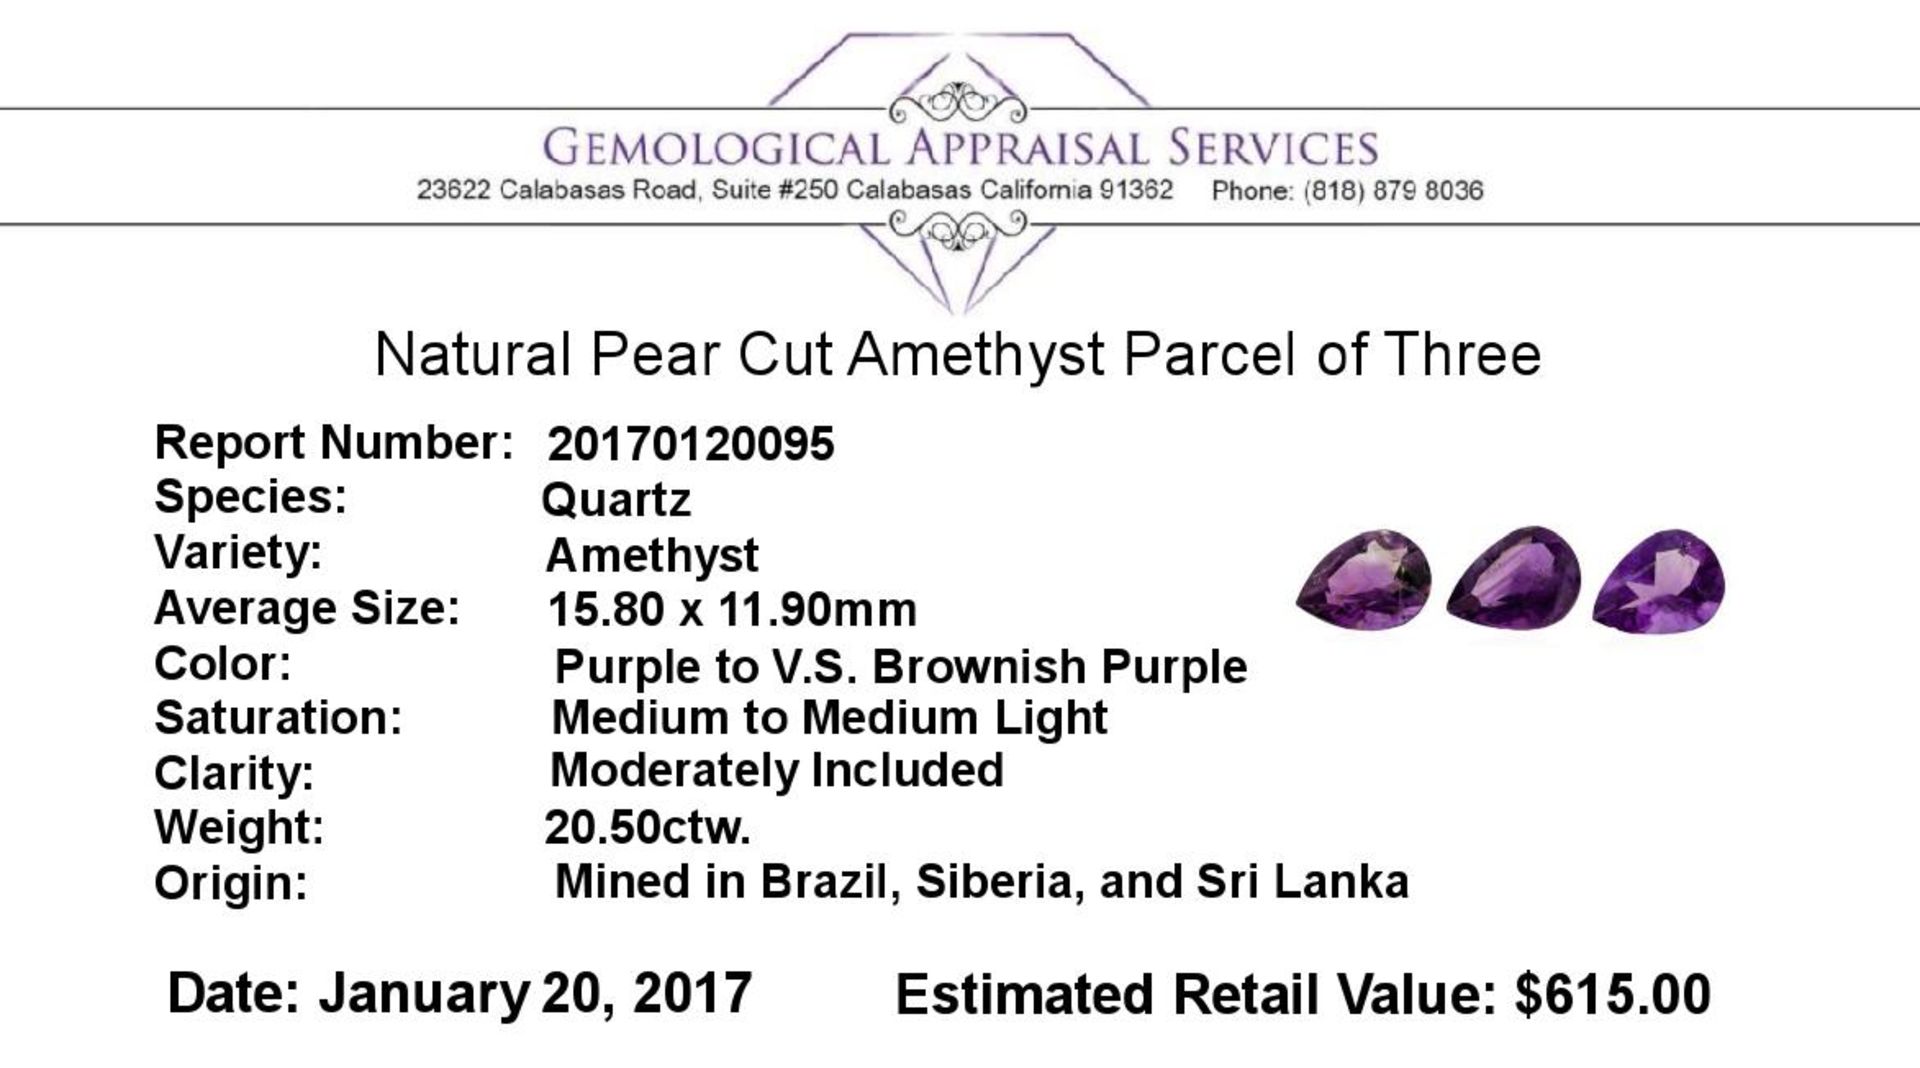 20.50 ctw.Natural Pear Cut Amethyst Parcel of Three - Image 3 of 3